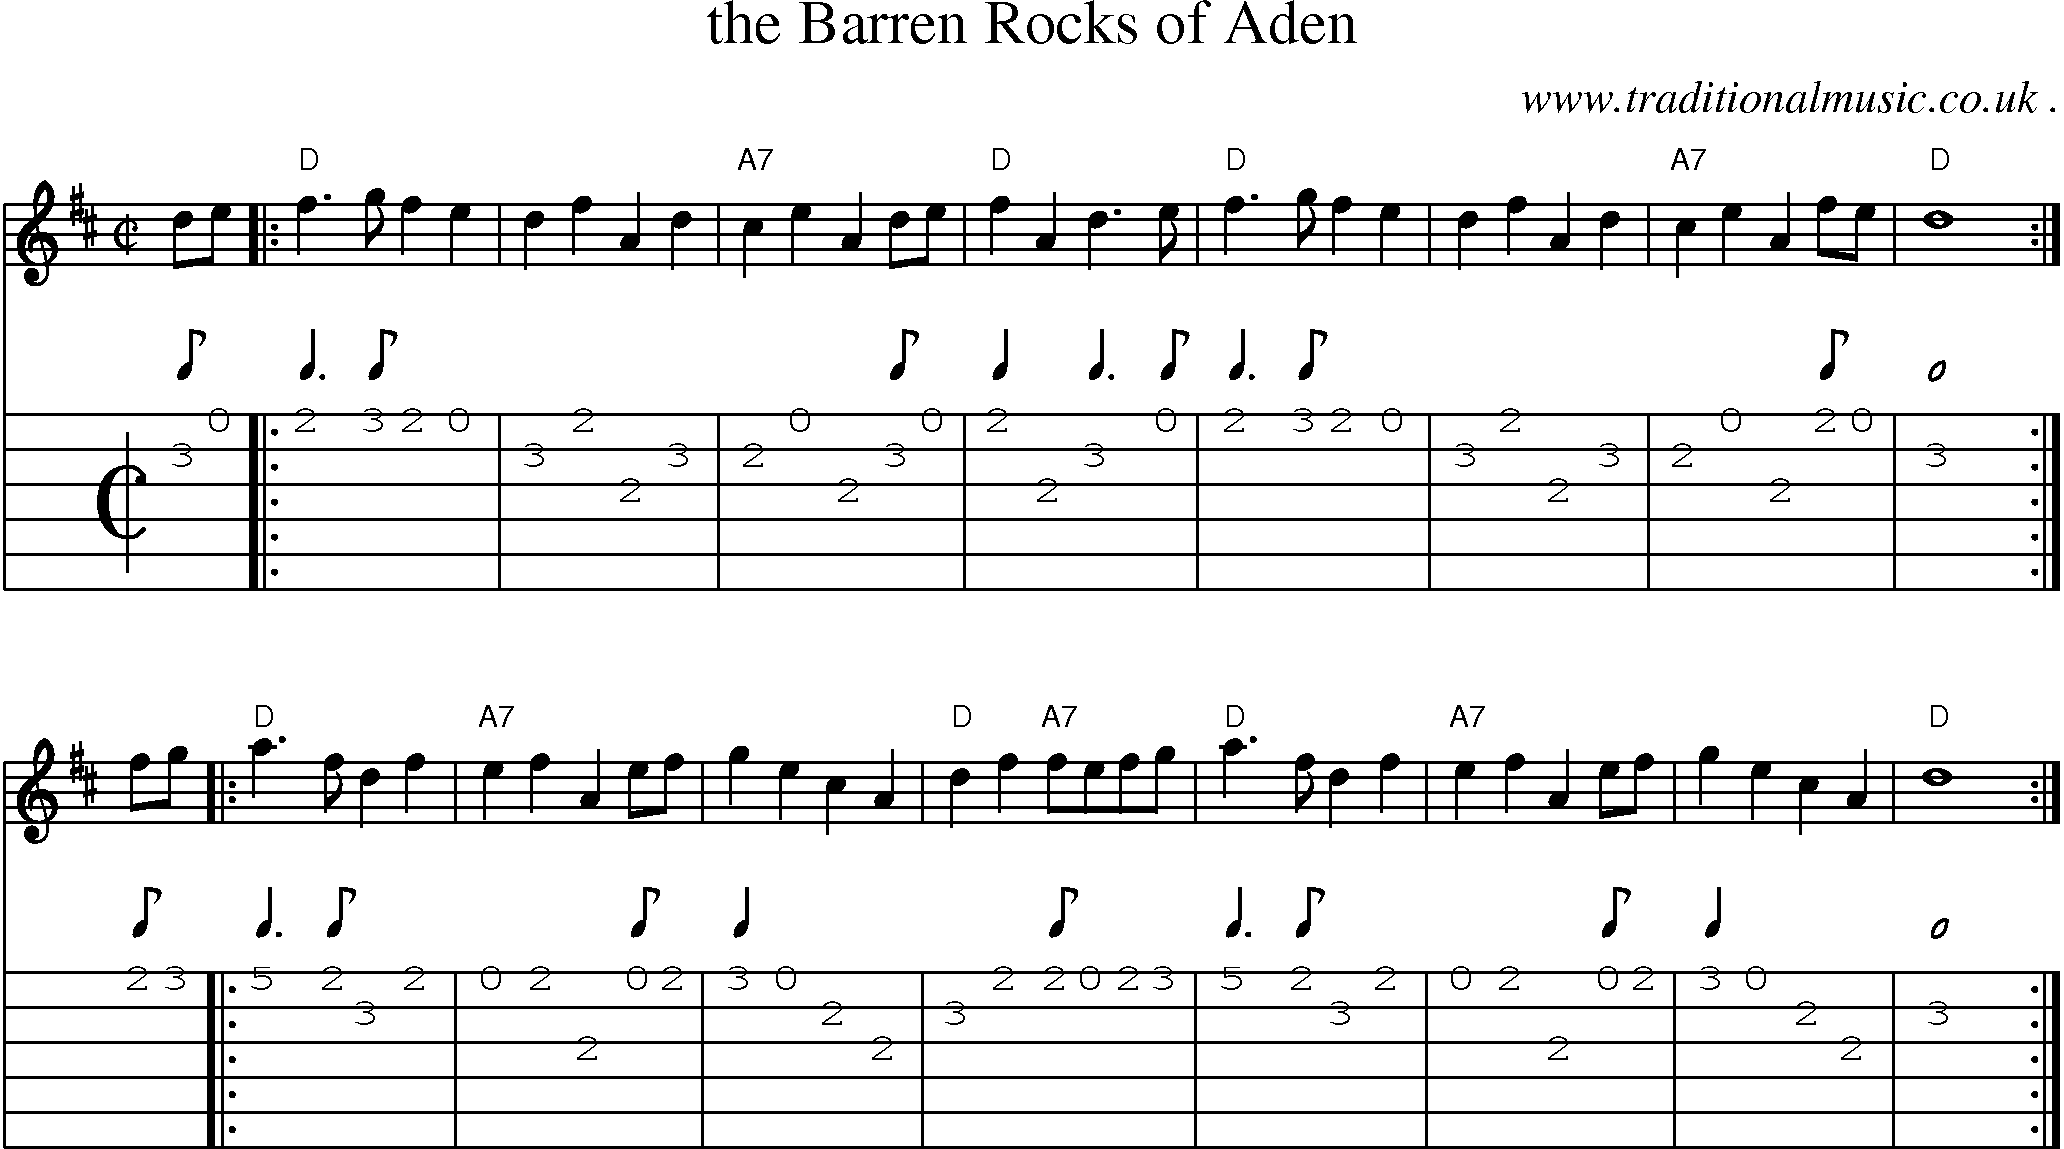 Sheet-music  score, Chords and Guitar Tabs for The Barren Rocks Of Aden